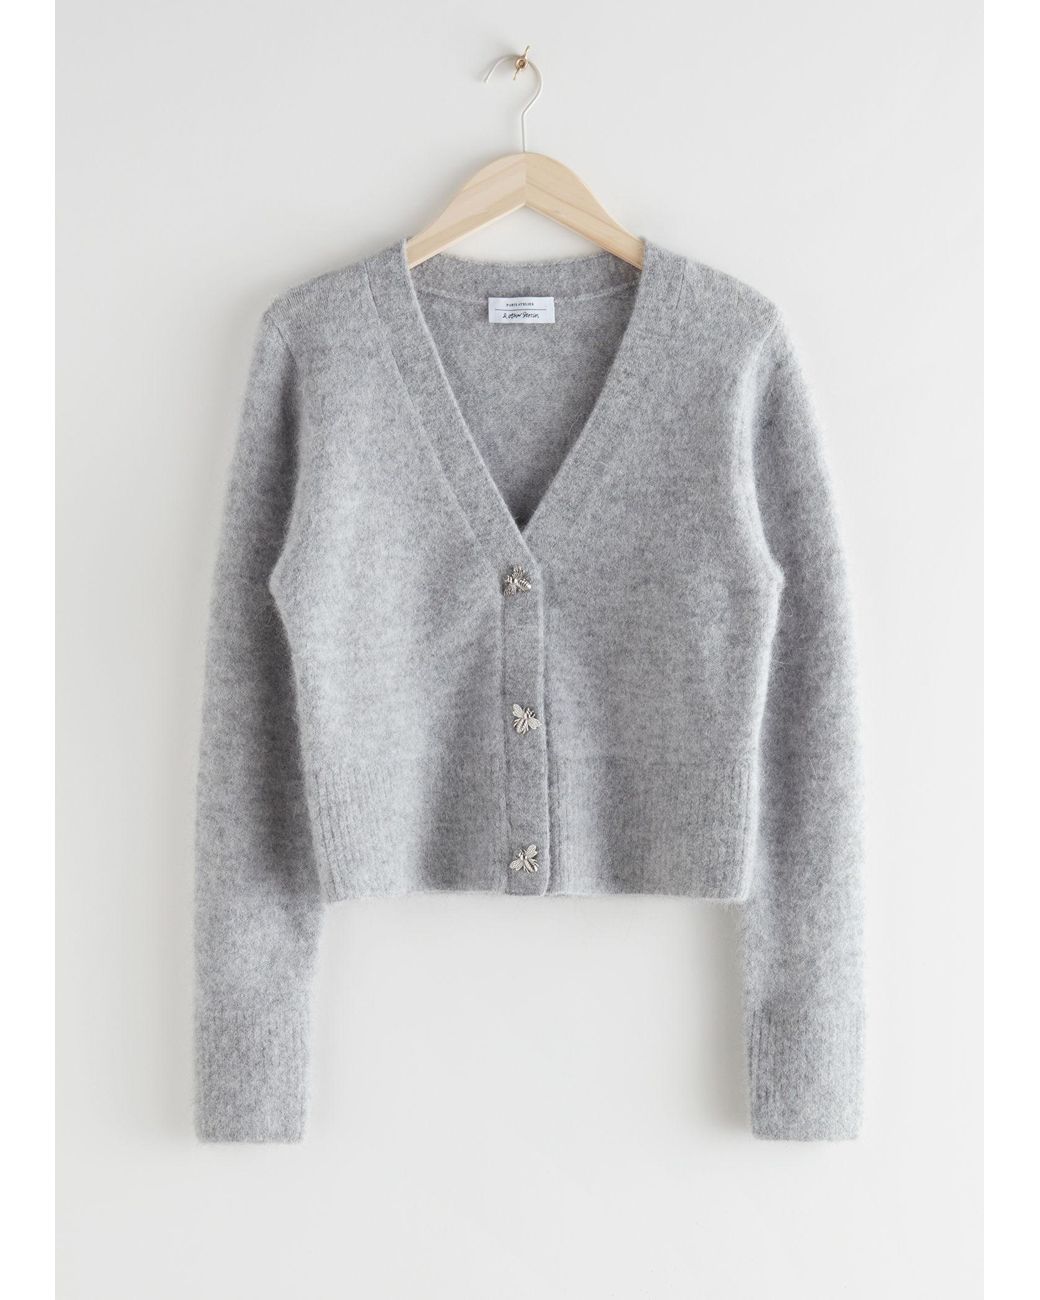 & Other Stories Bee Button Alpaca Blend Cardigan in Grey | Lyst Canada